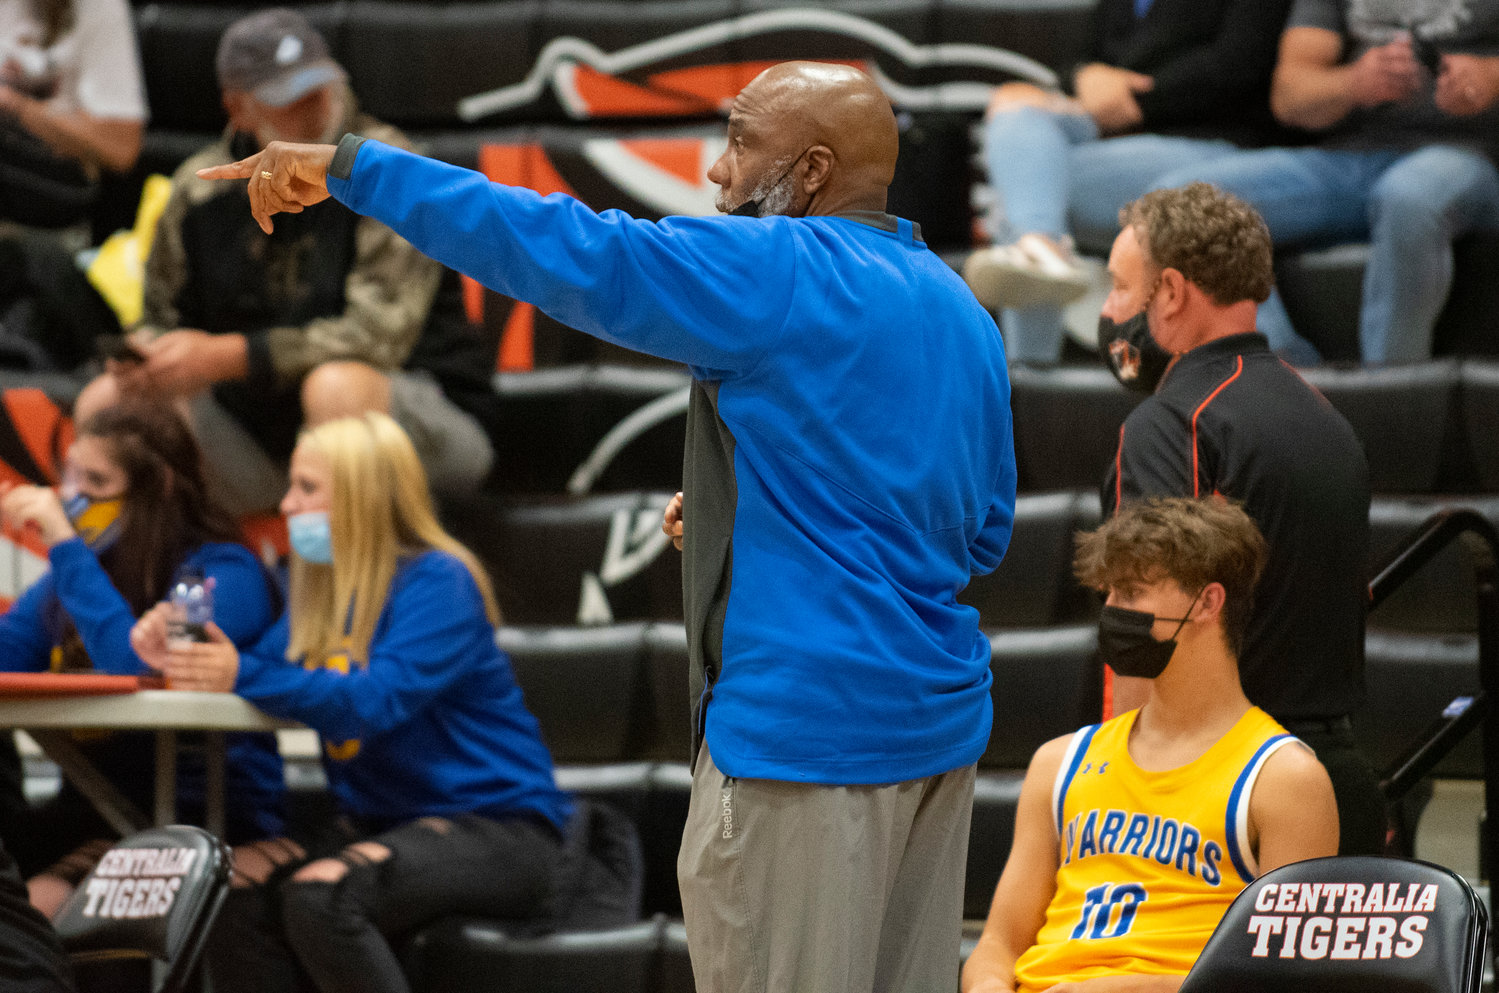 Rochester coach Derrick Pringle calls out instructions to the Warriors in a game against Centralia on Wednesday.